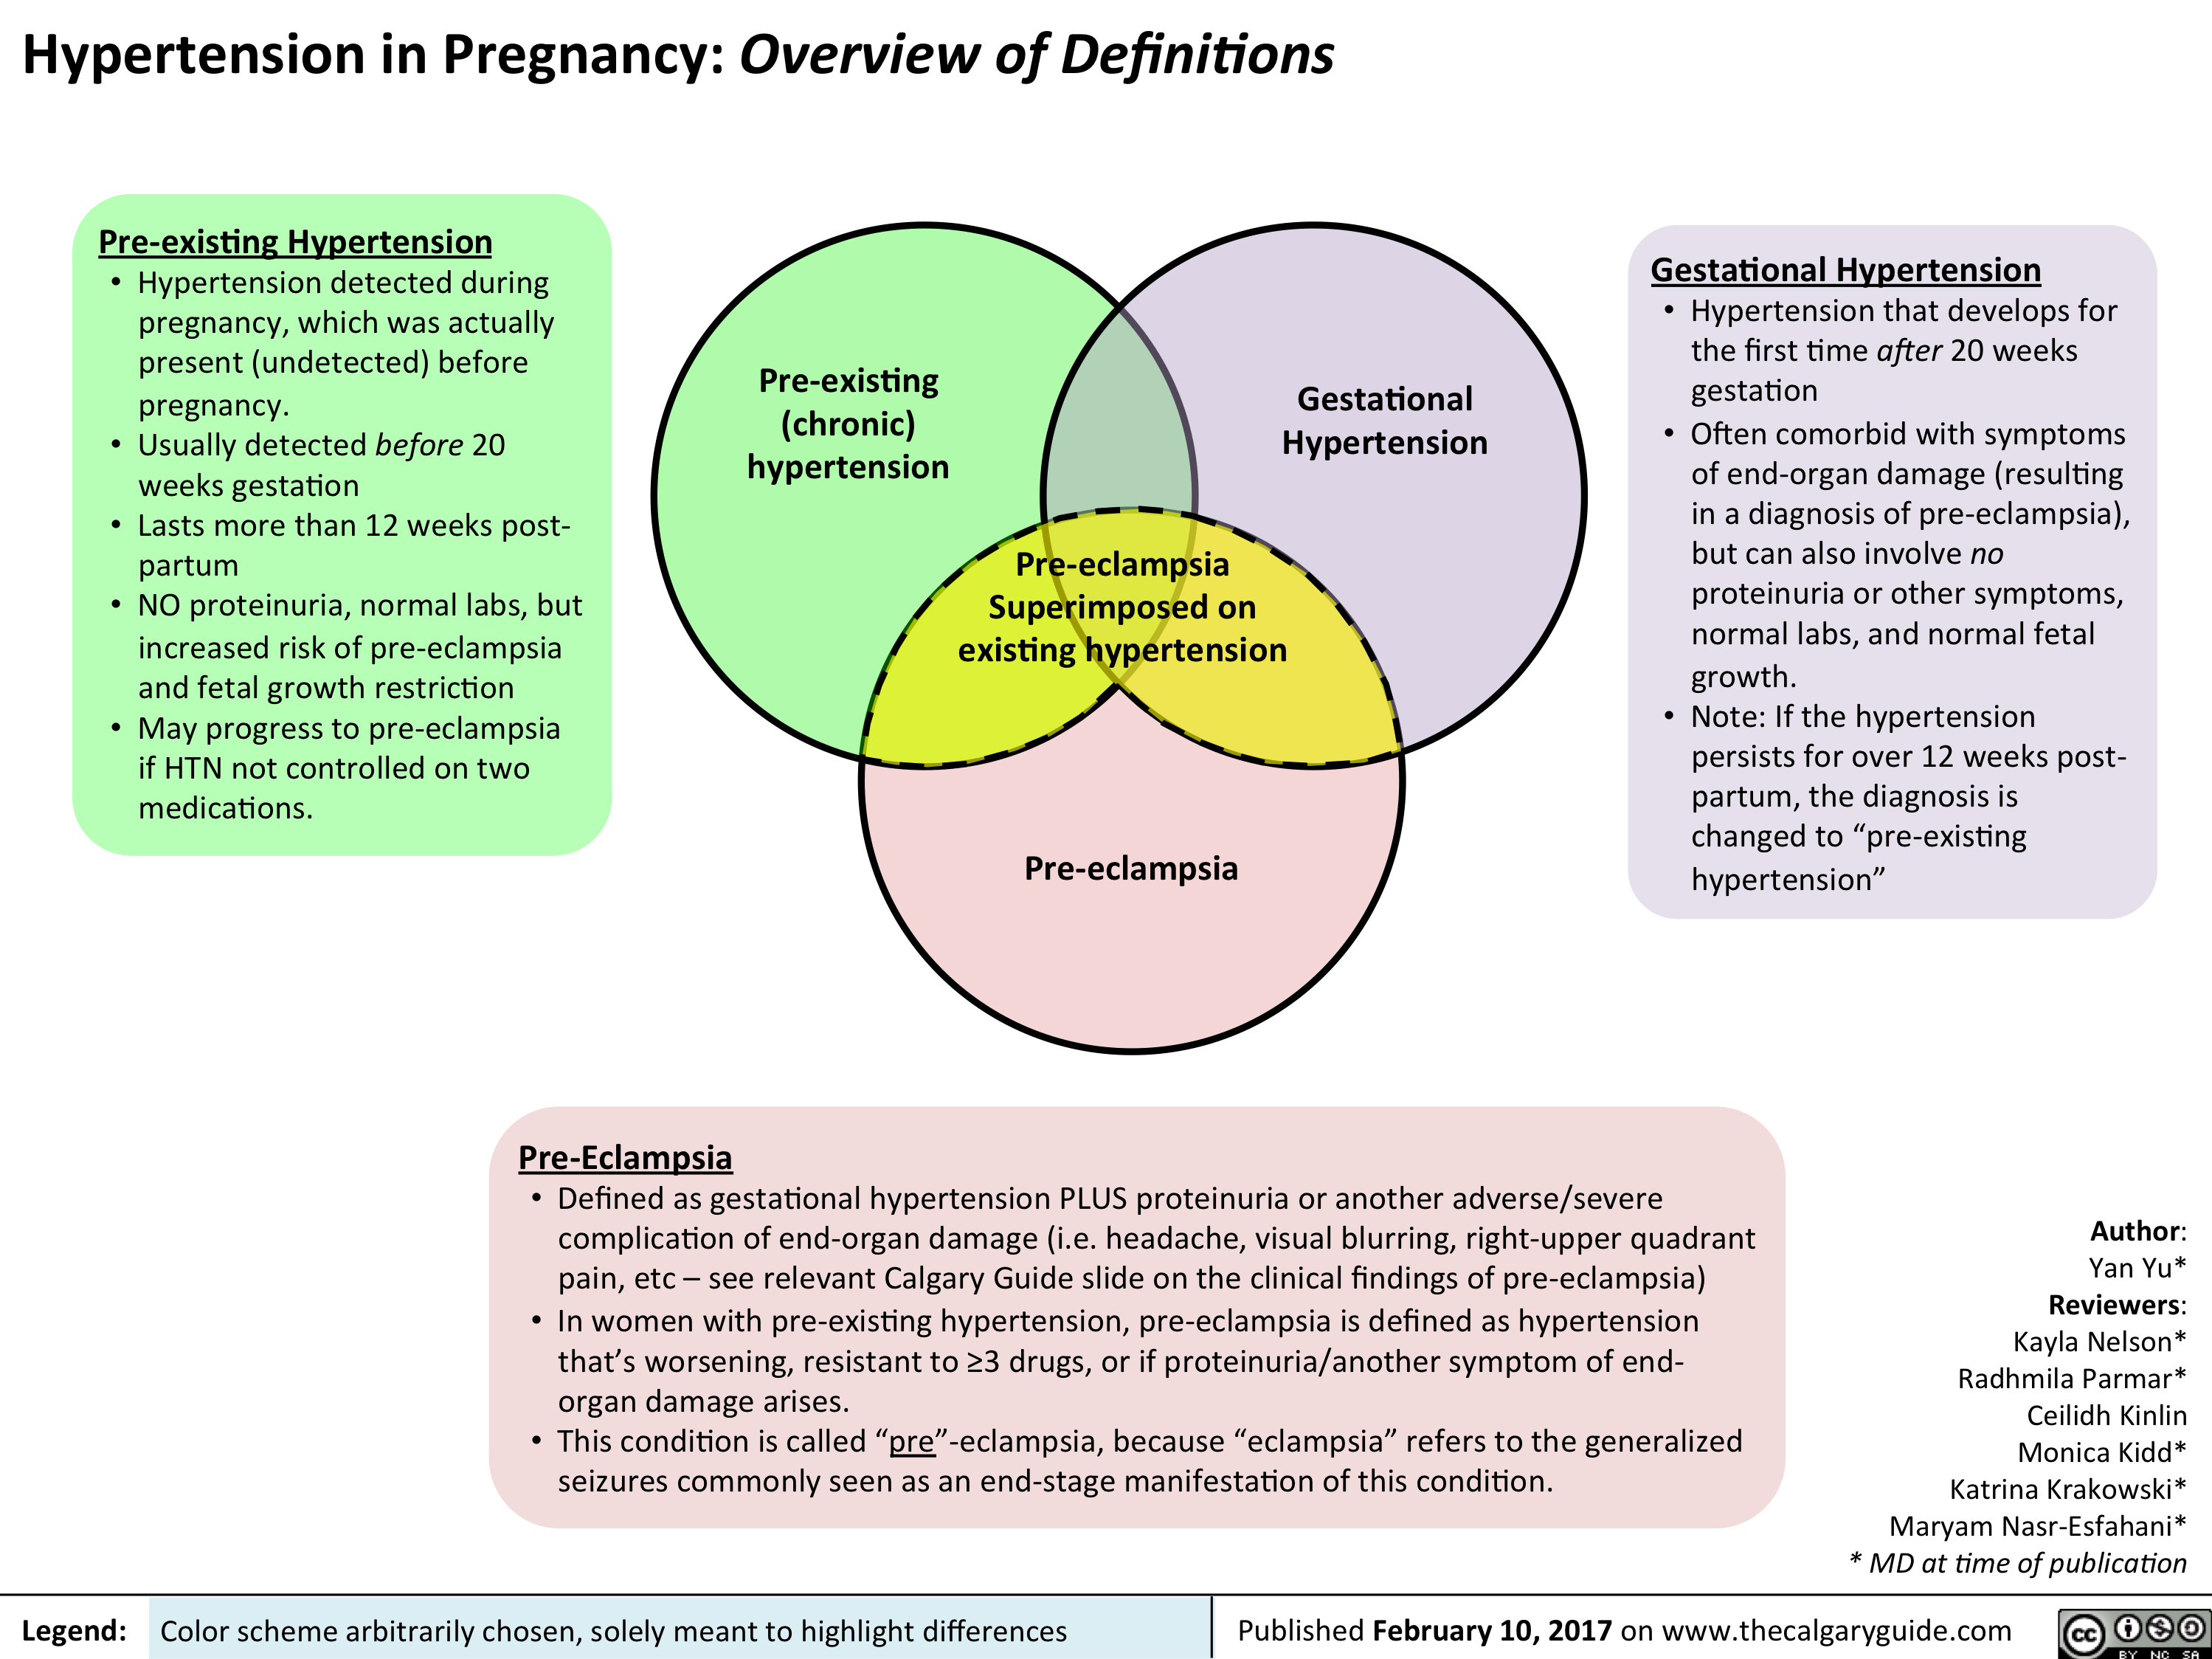 hypertension-in-pregnancy-overview-of-definitions